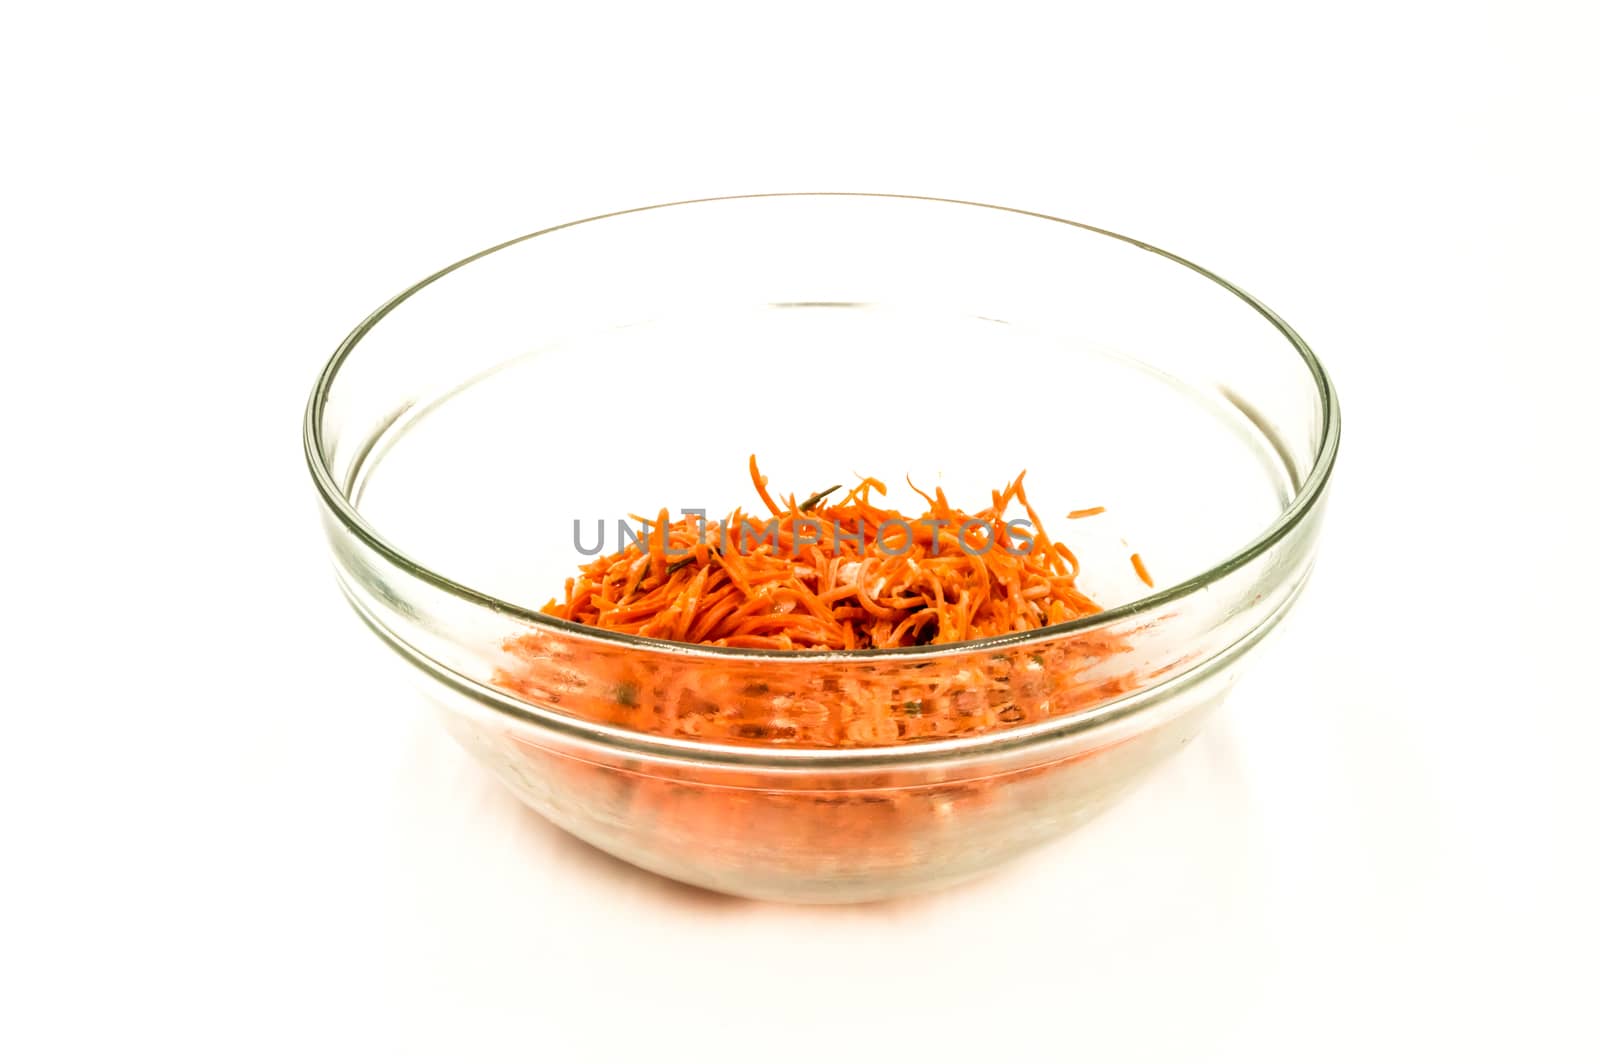 Grated carrot salad in a transparent bowl on a white background